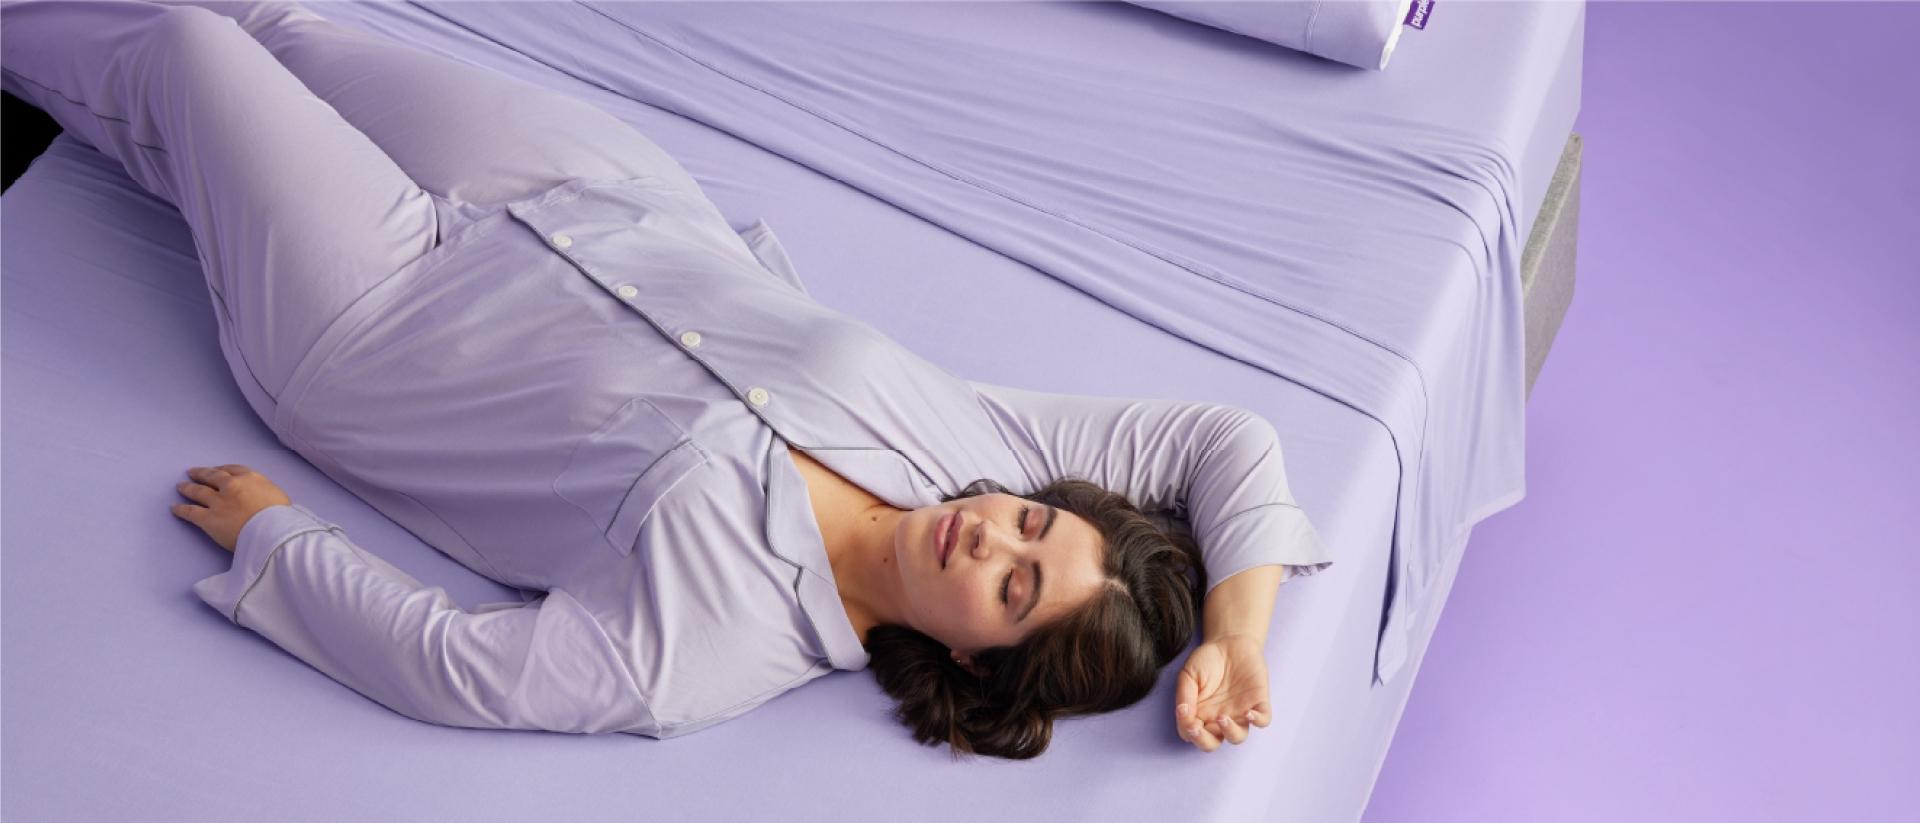 A woman in purple pajamas lying on a bed with purple sheets.